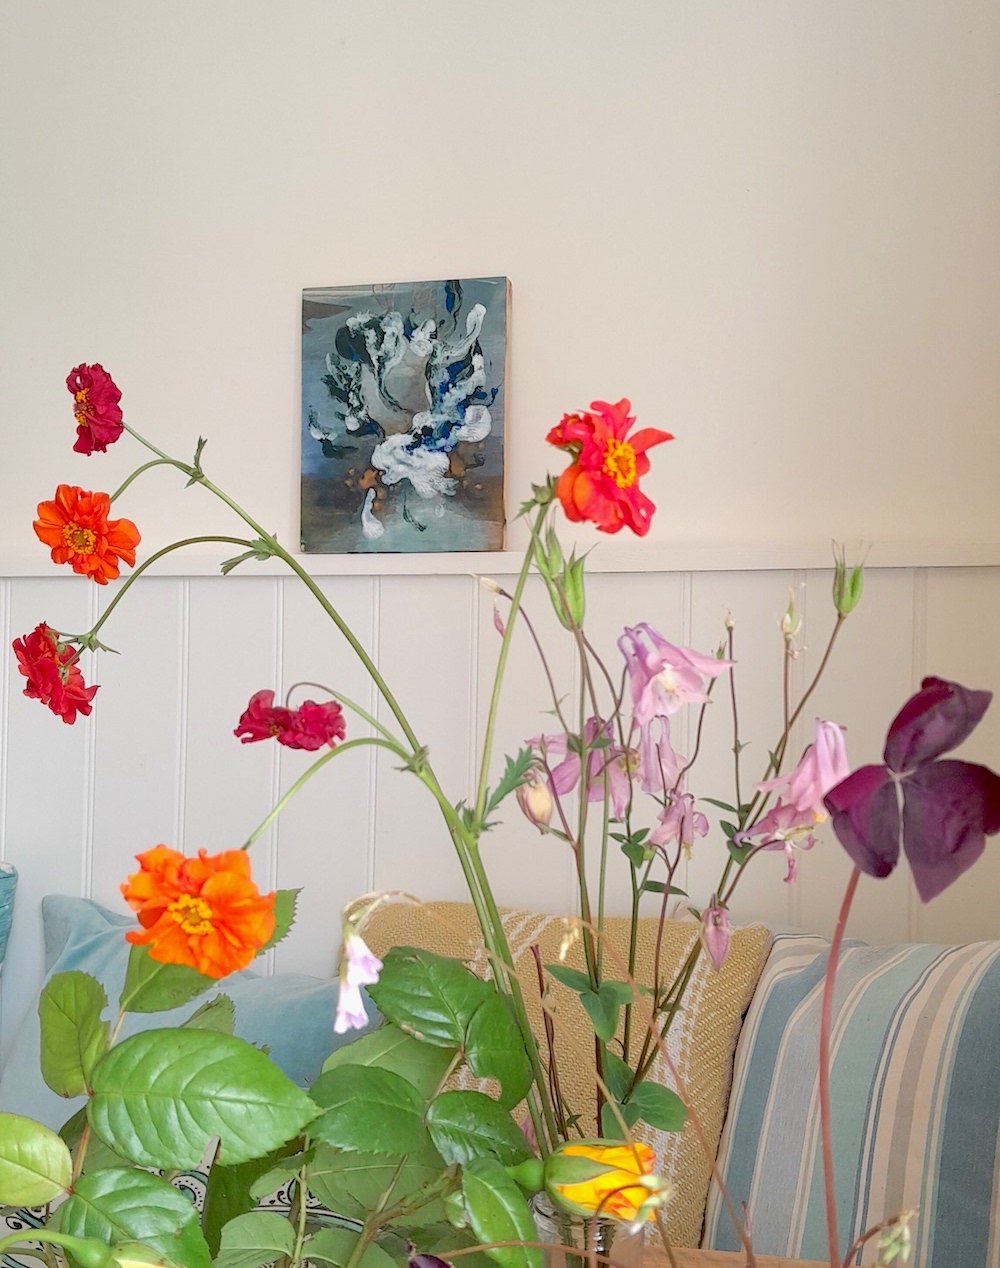 Belonging on display in the kitchen with flowers